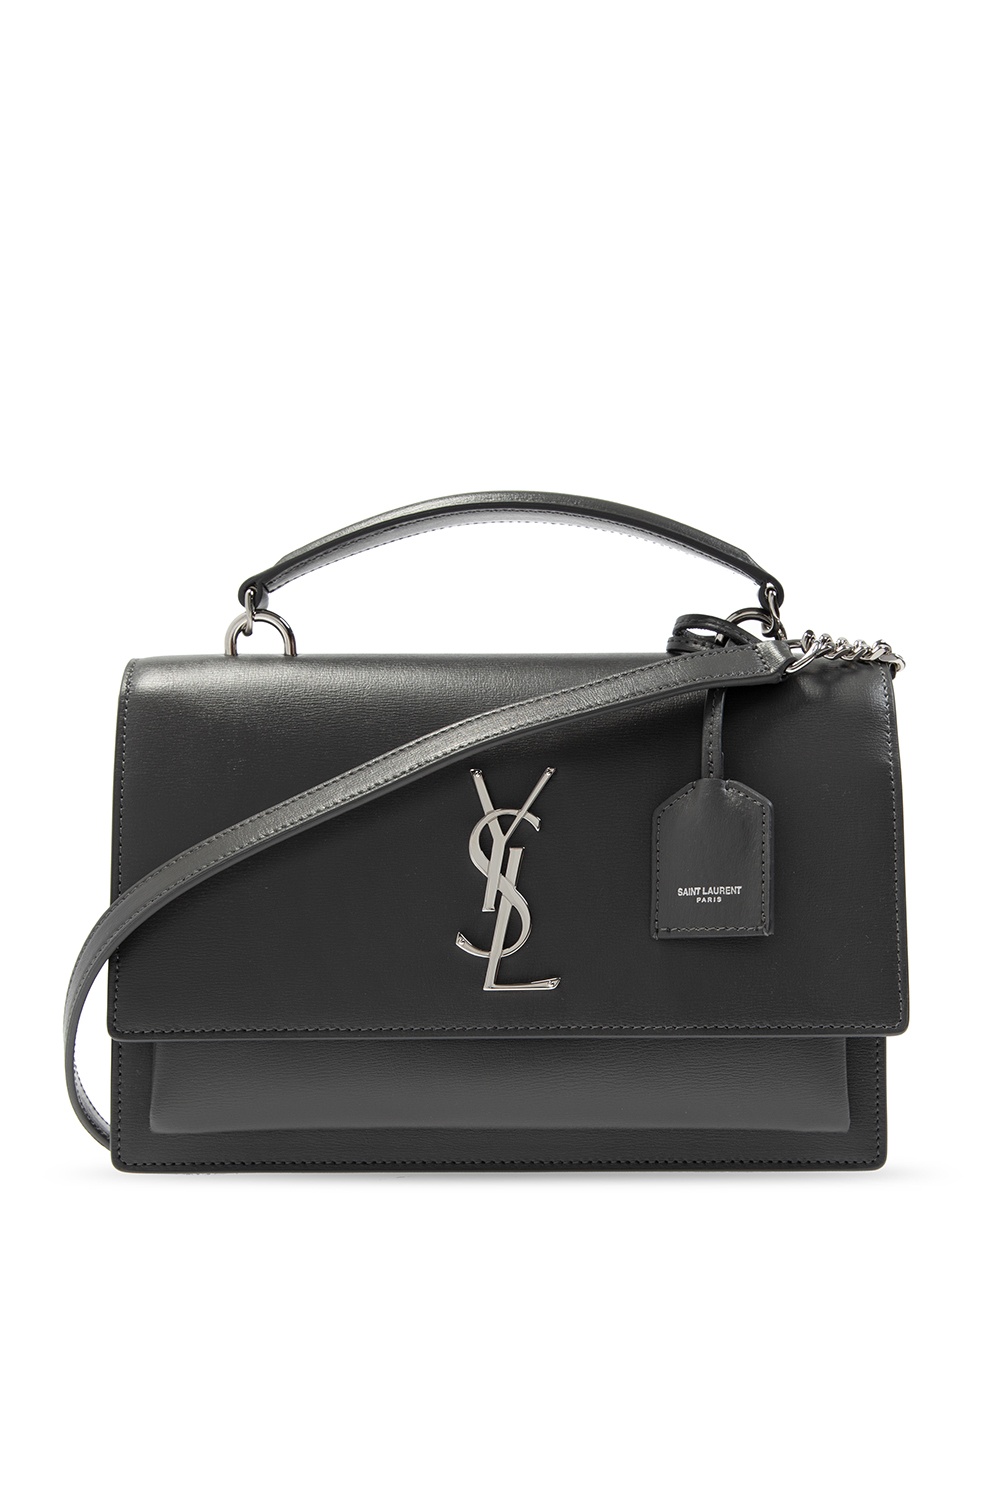 2015 Saint Laurent Runway Collection Outlet-YSL Top Handle Bag in